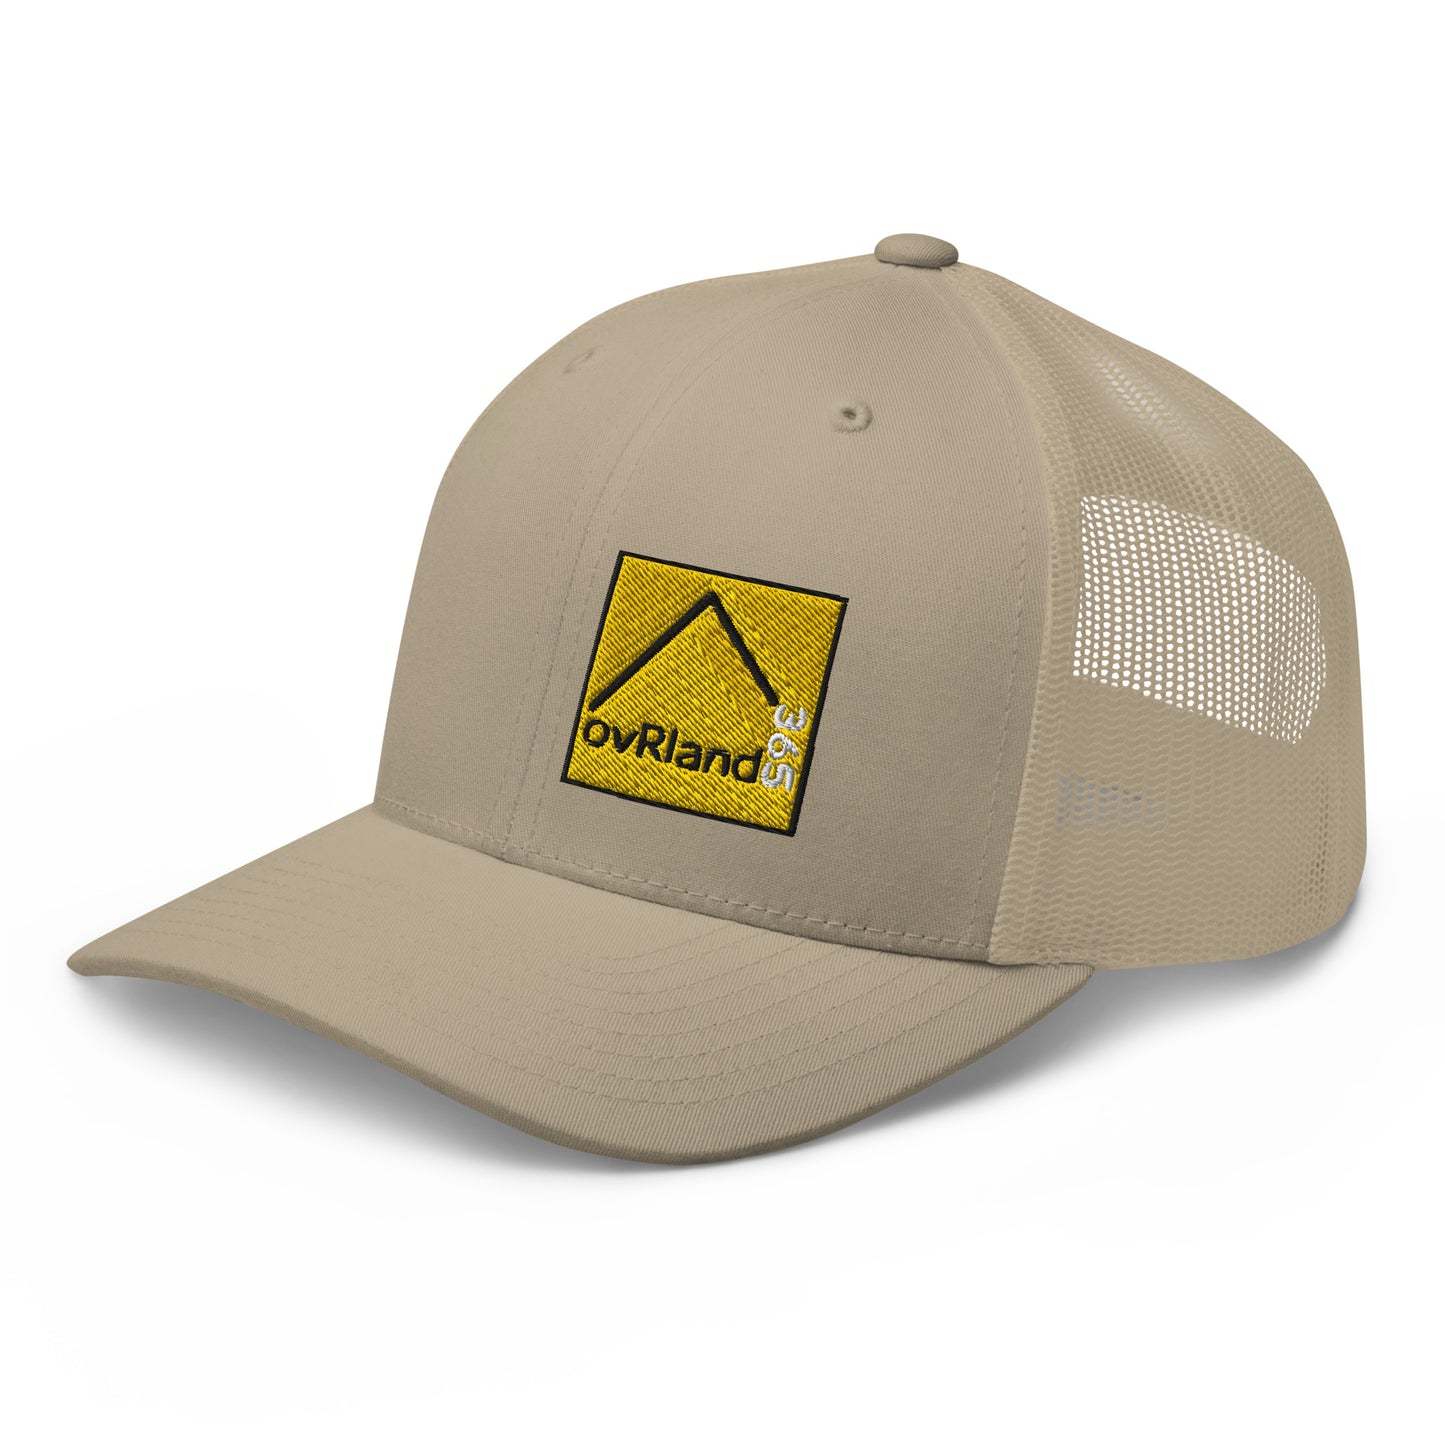 Khaki Snap Back Trucker Cap with our square 365 logo. side facing. overland365.com